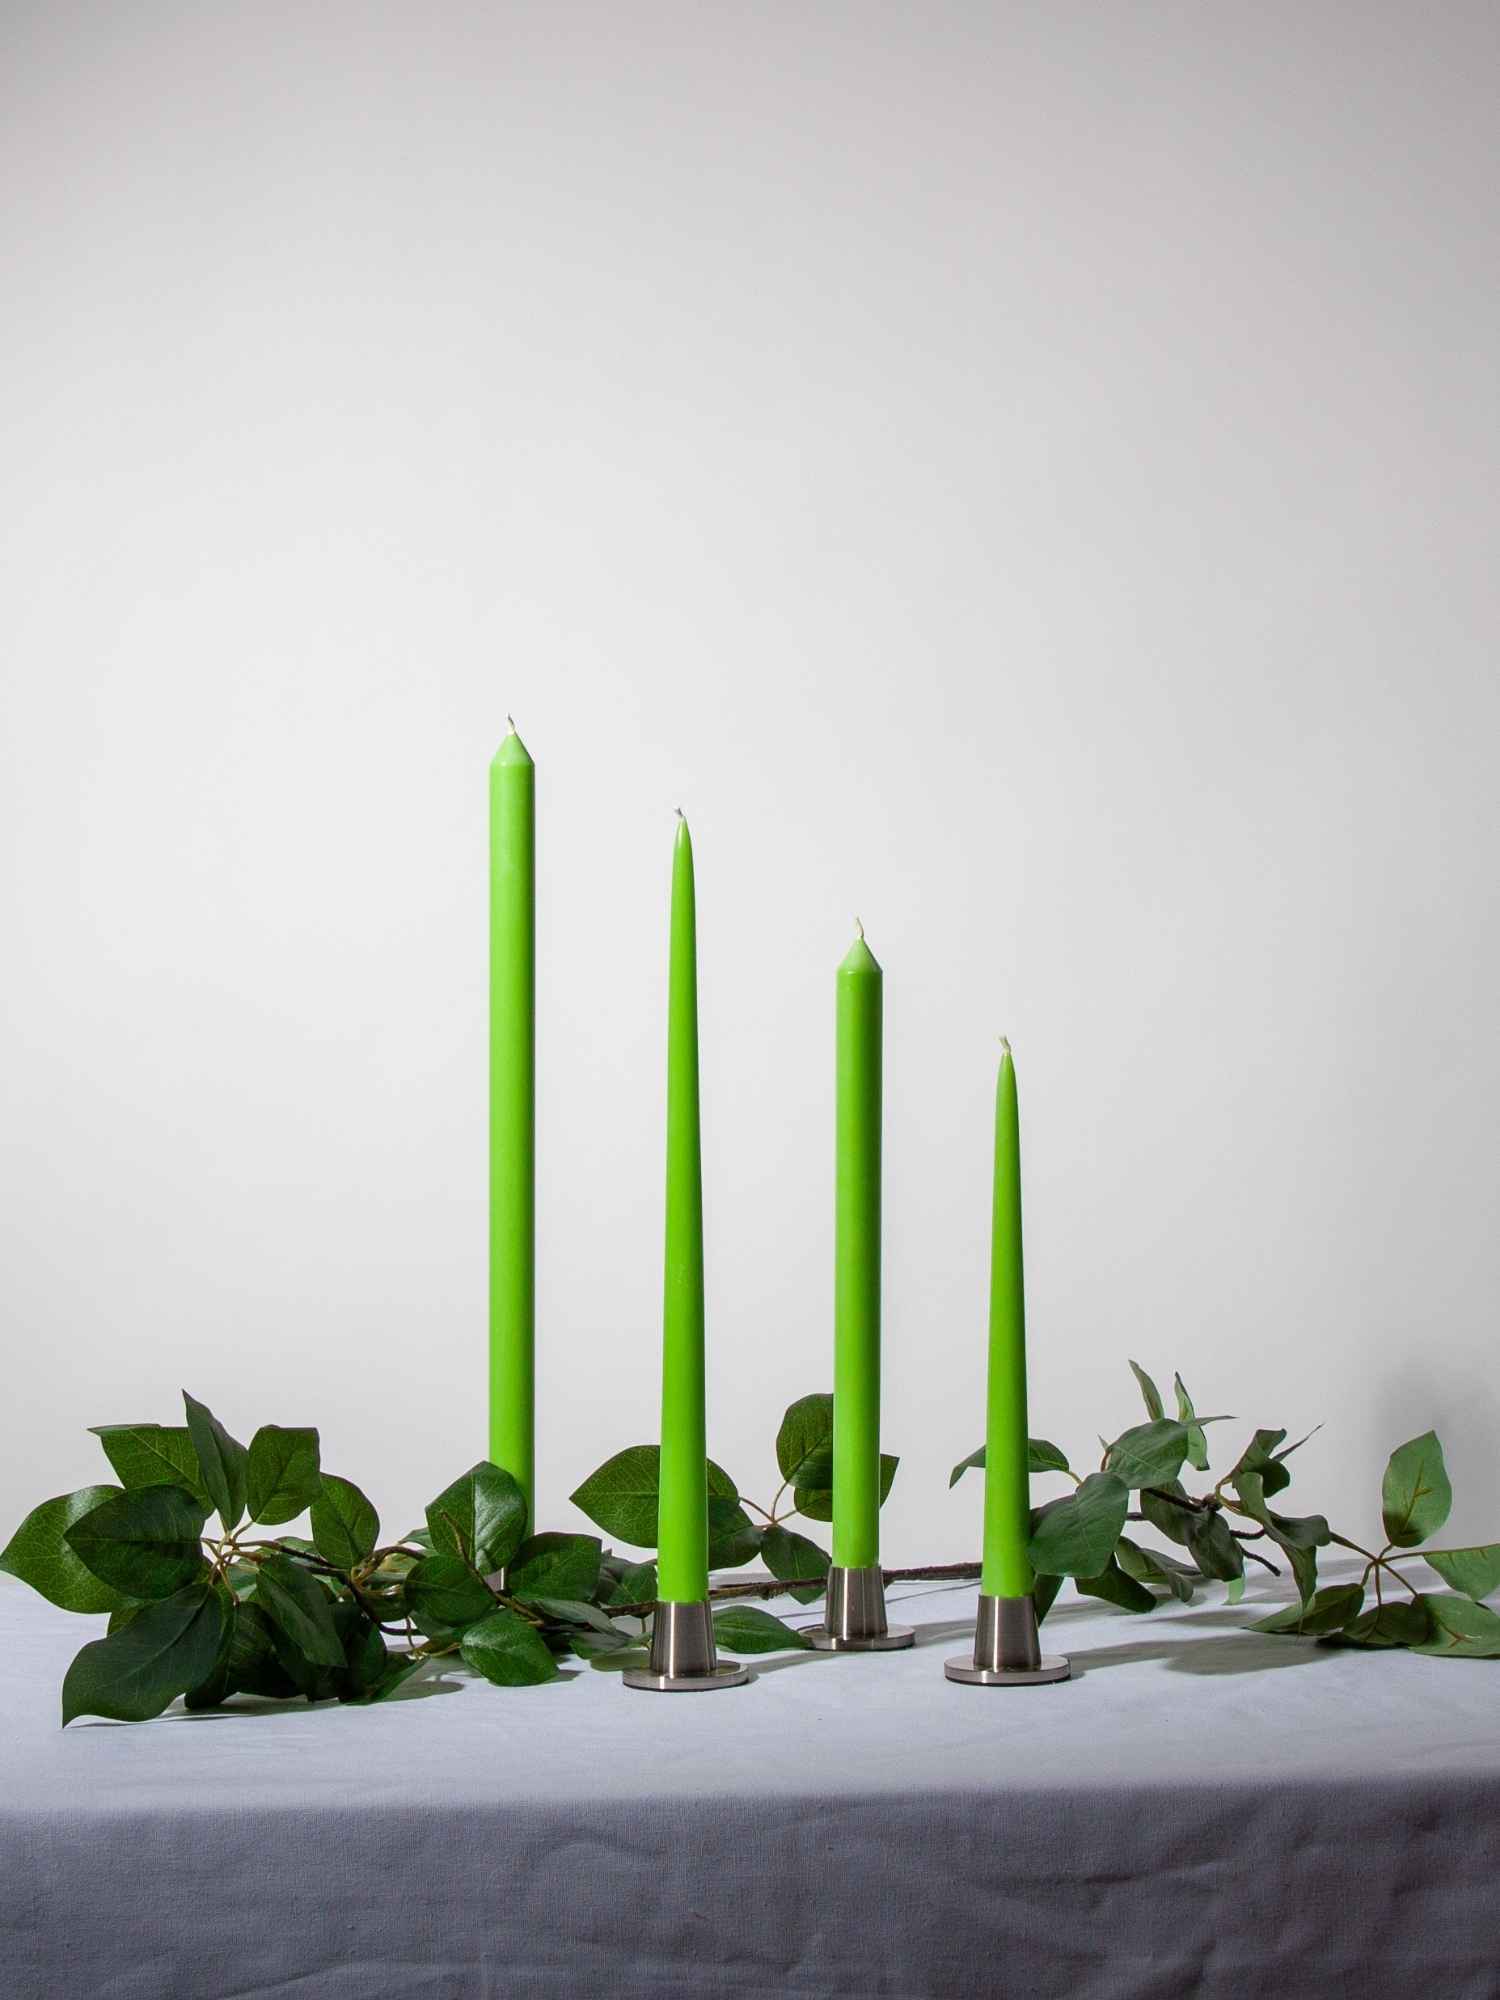 Lime 30cm Dinner Candle, Pack of 4